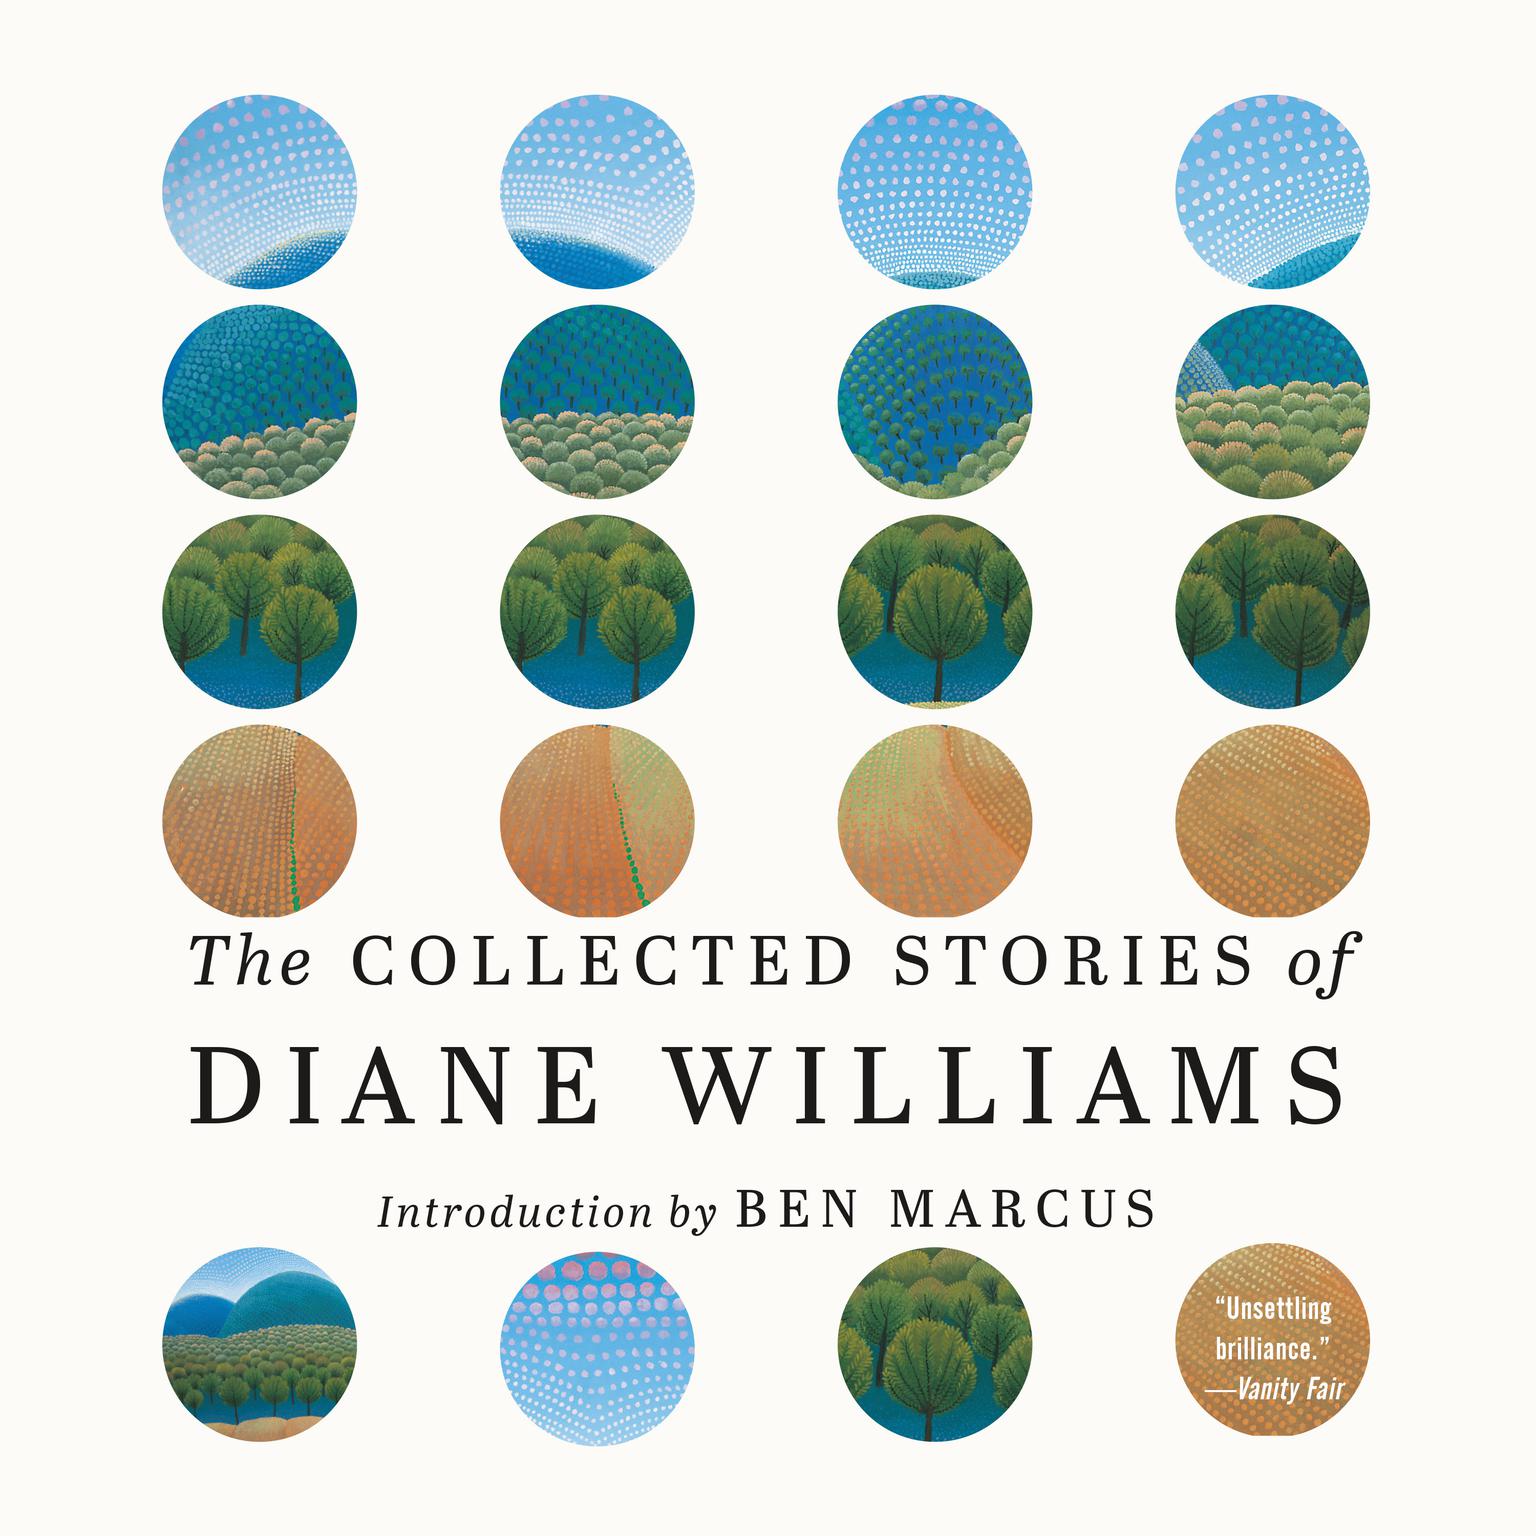 The Collected Stories of Diane Williams (Abridged) Audiobook, by Diane Williams